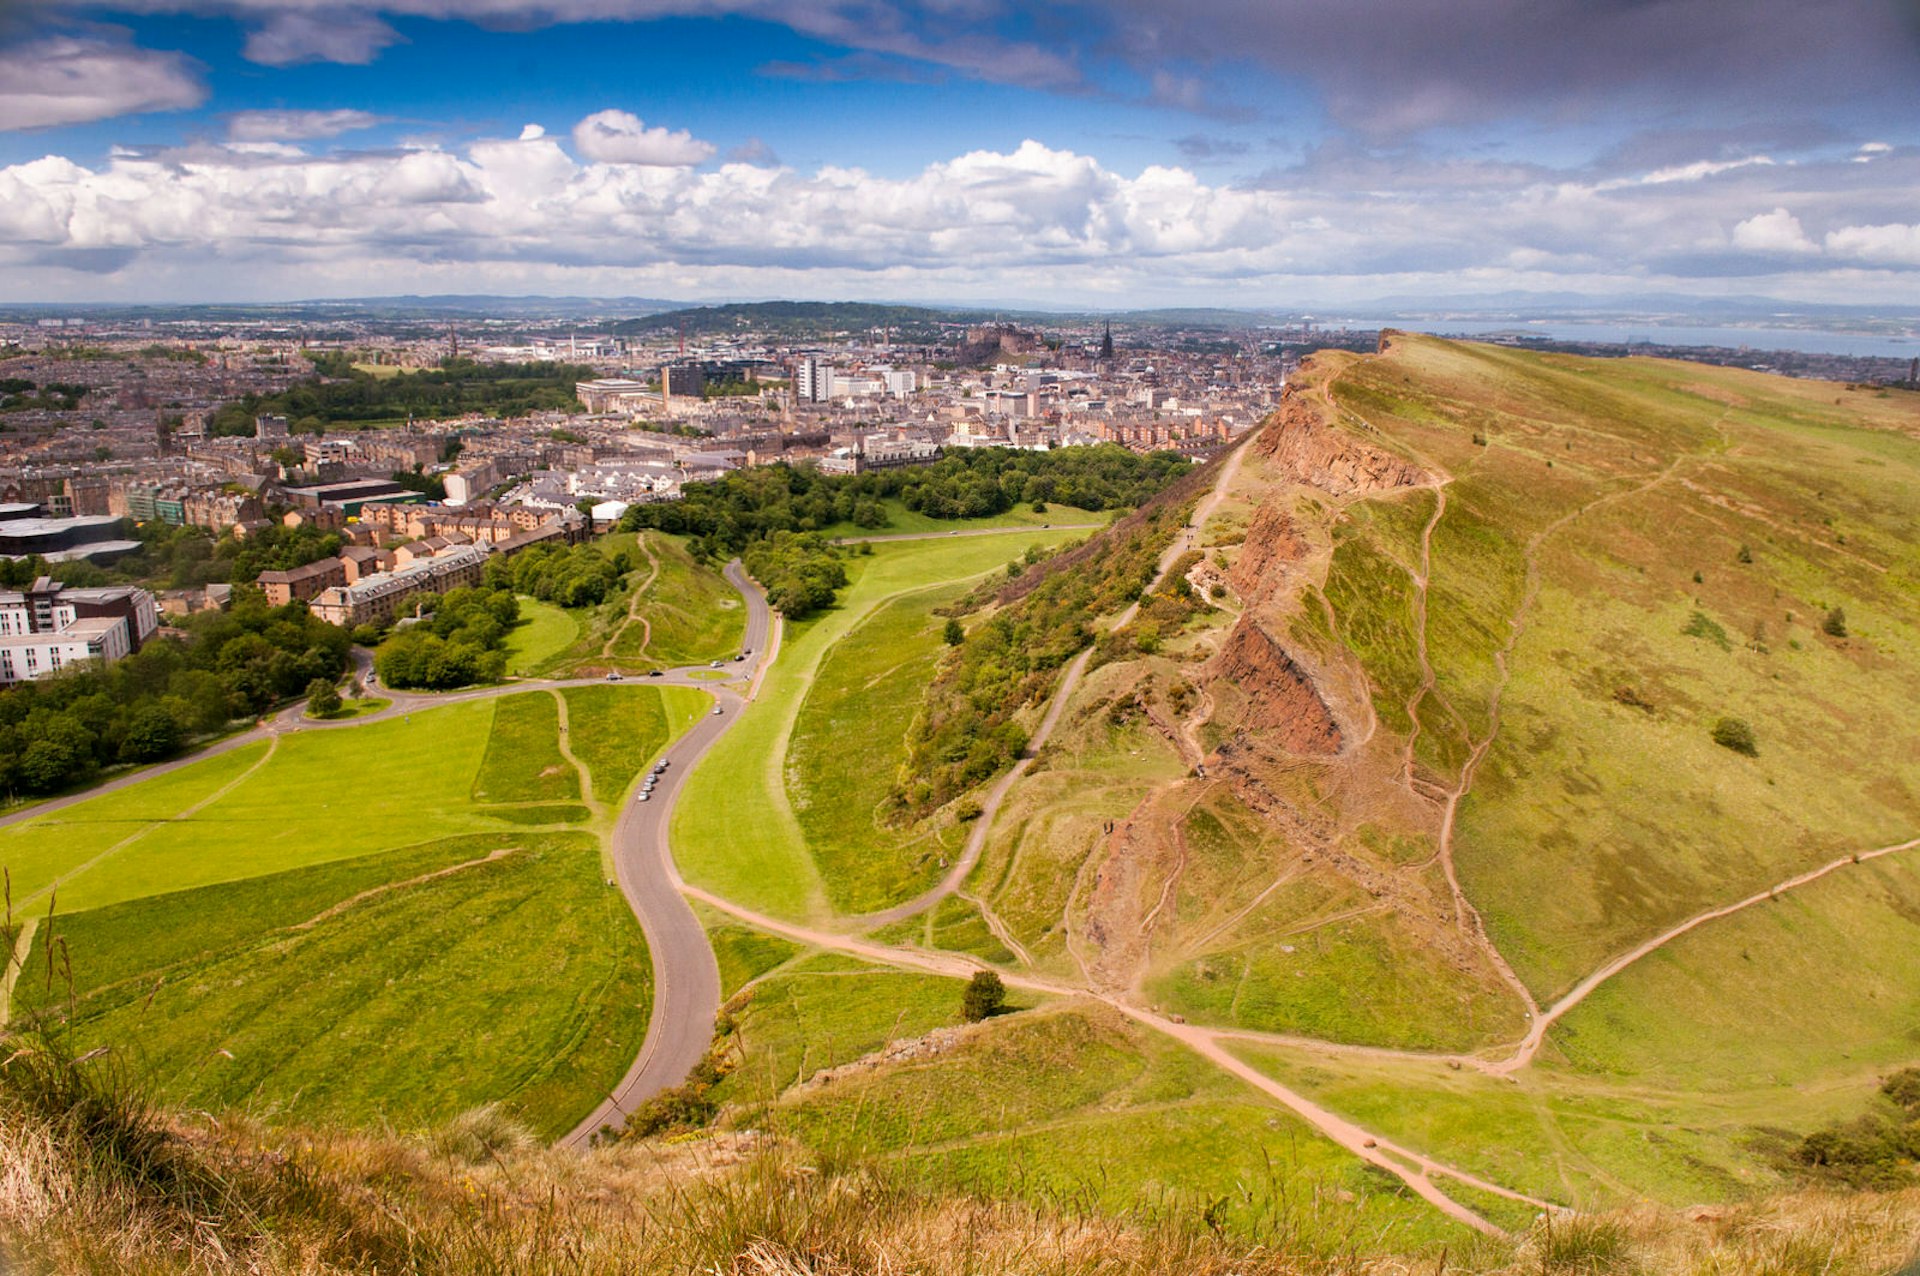 Arthur's Seat offers great views across the city